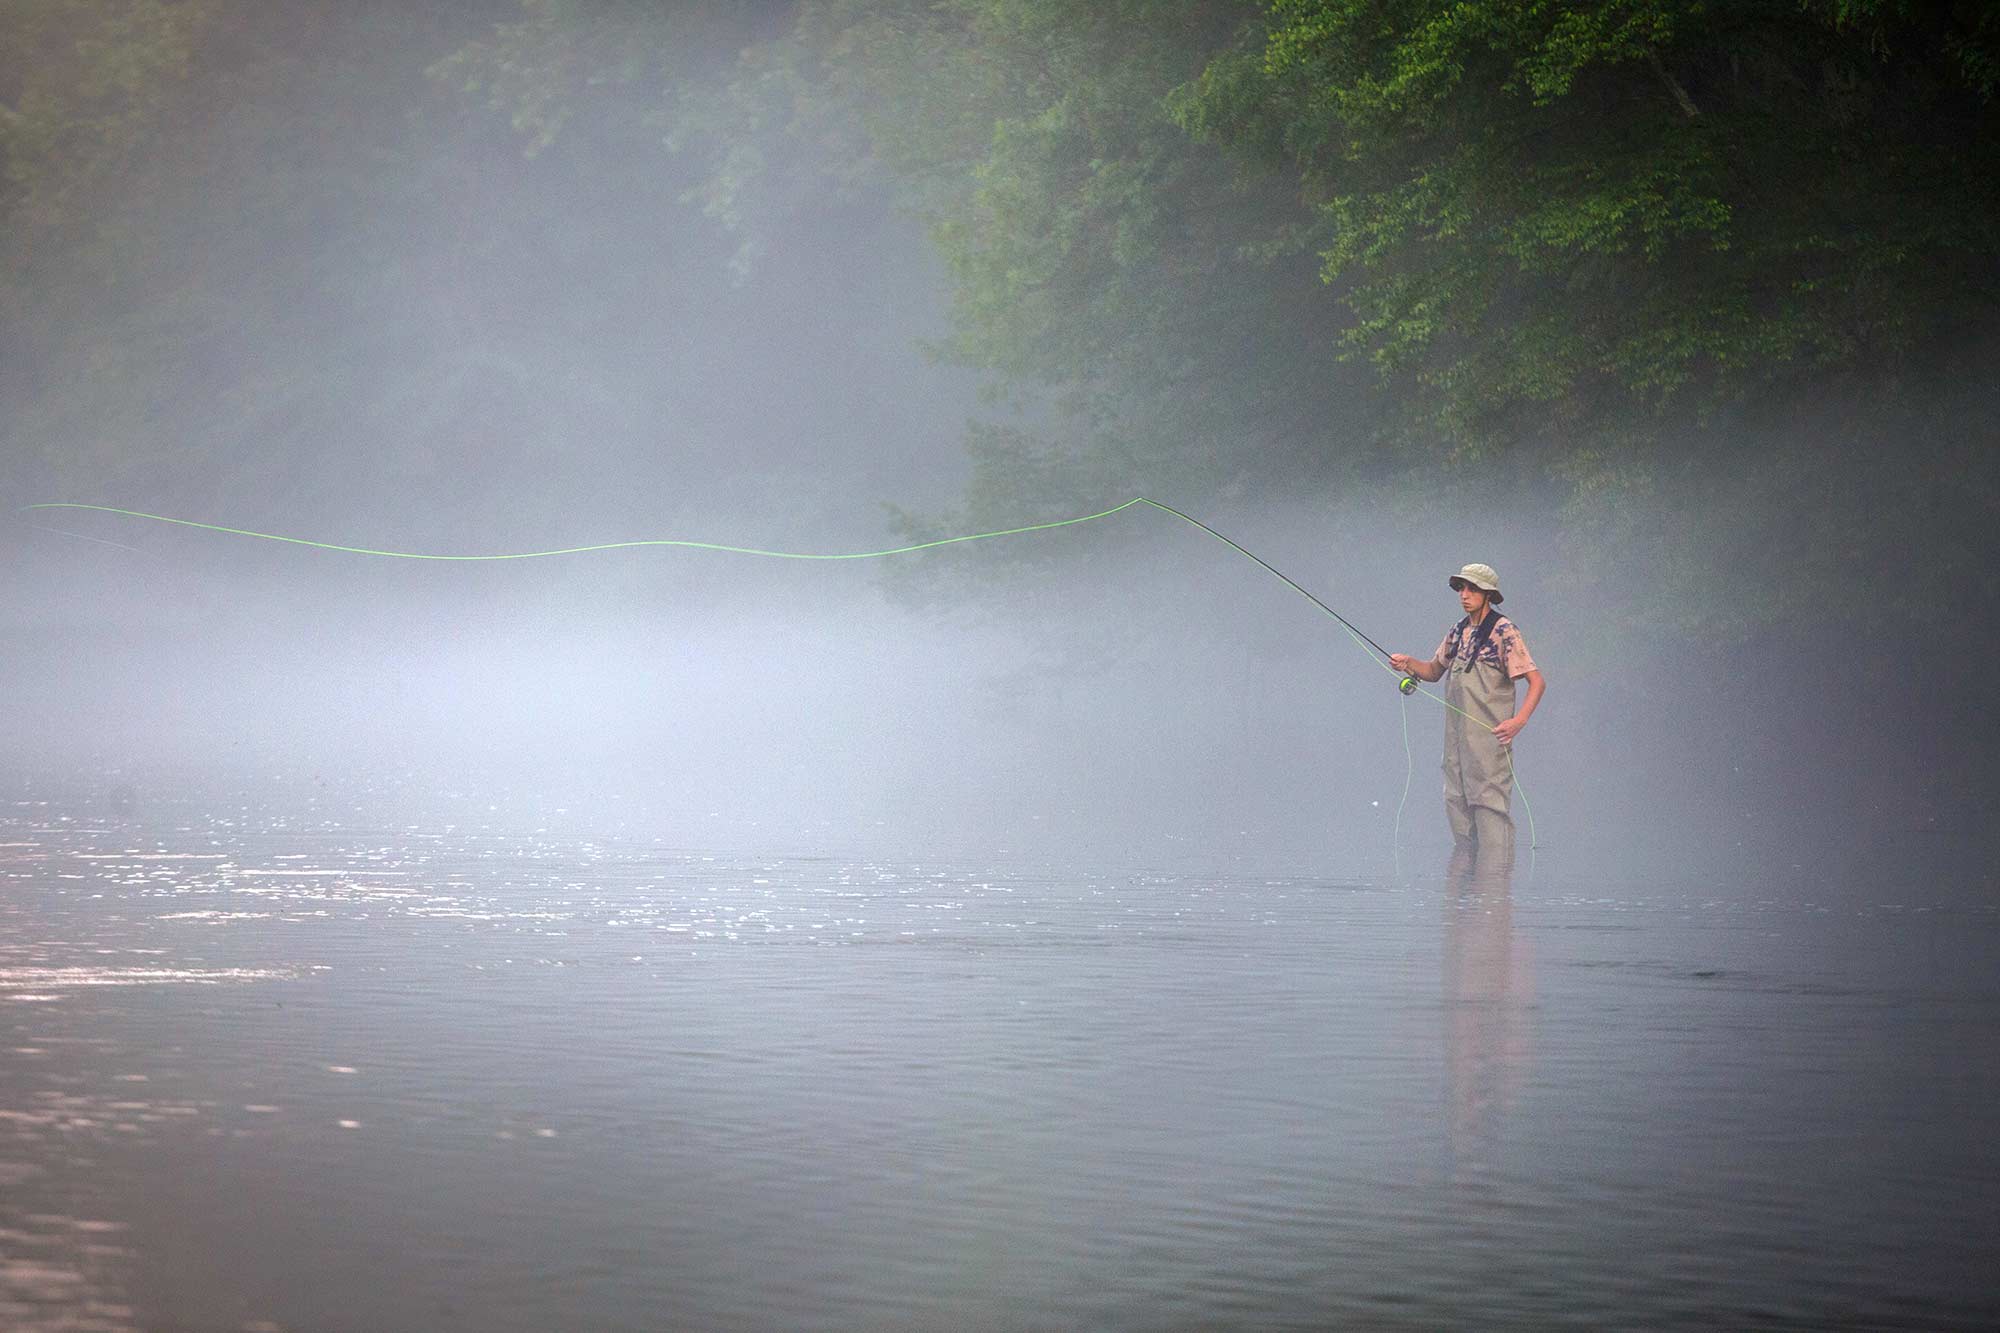 Fly fishing, Collinsville, CT - 6/21/15